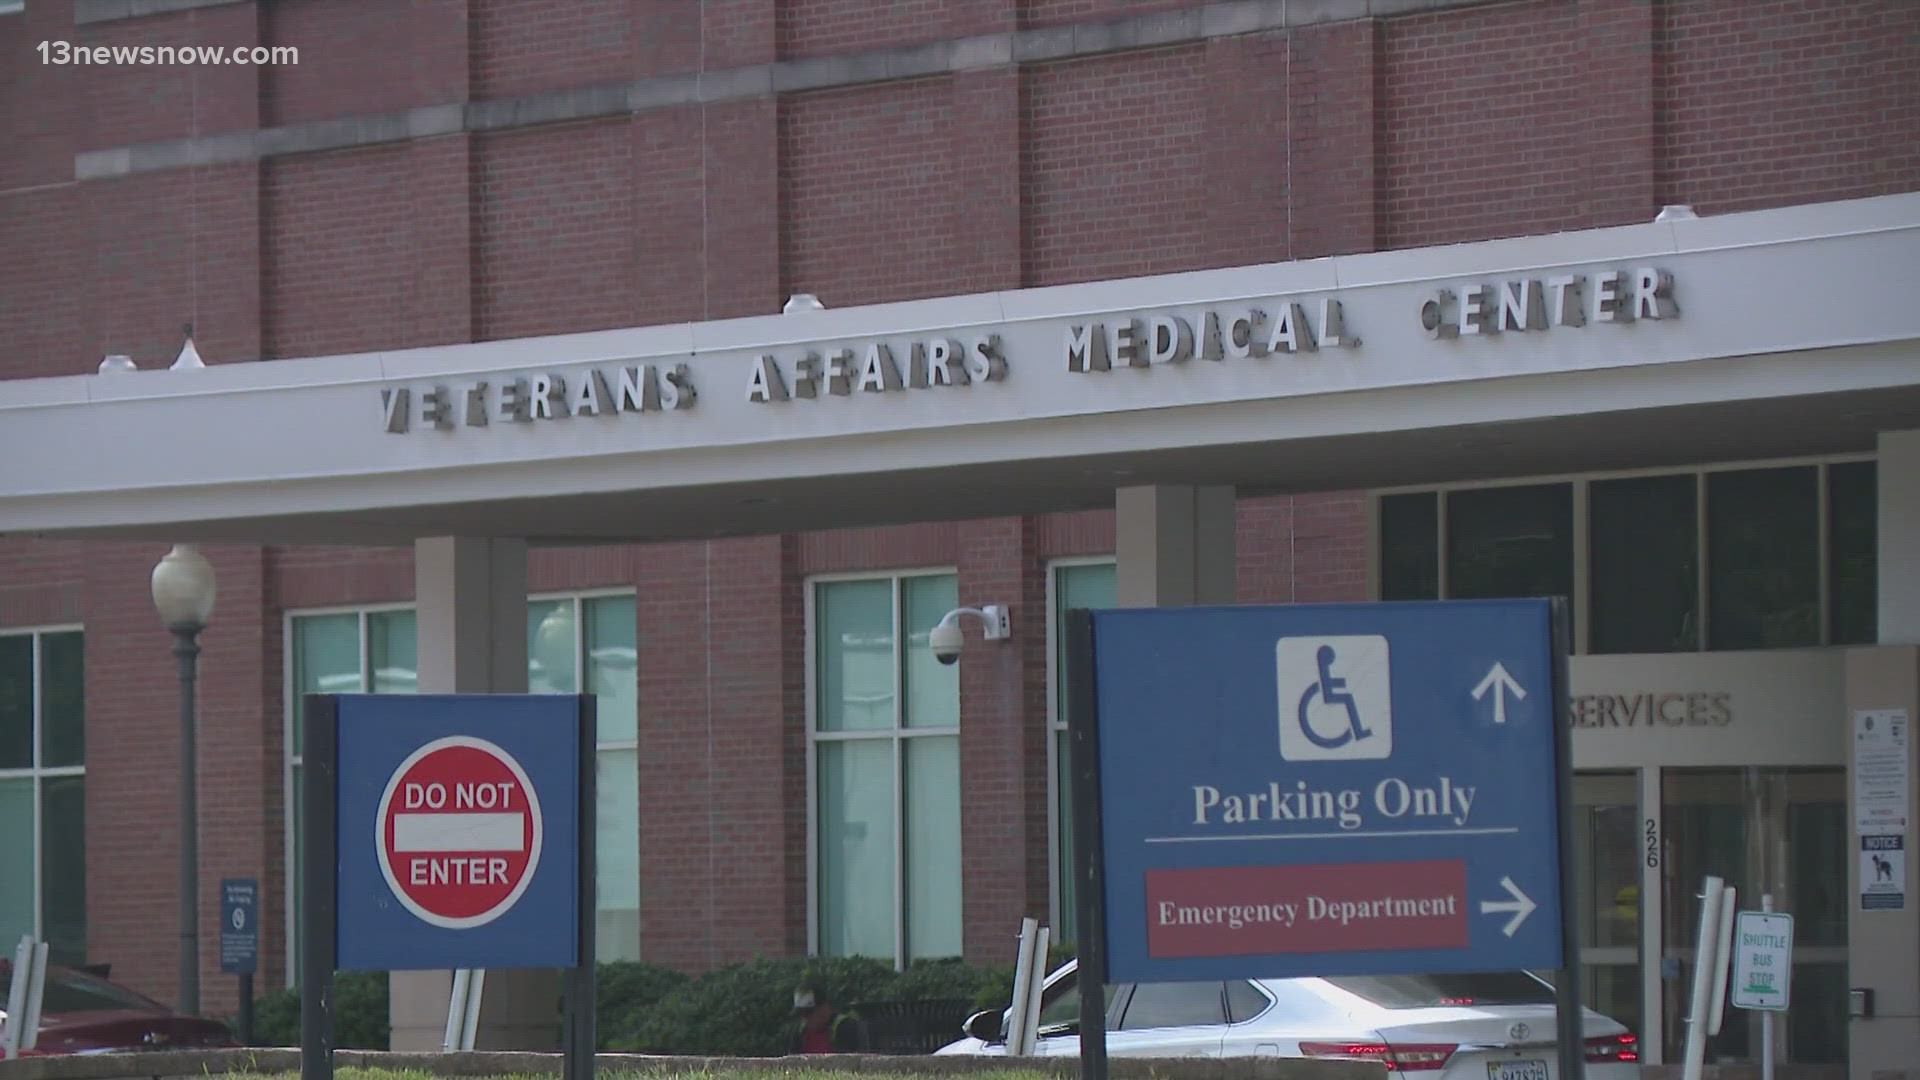 The VA has seen an increase in the number of whistleblower retaliation cases, according to a new report from the Government Accountability Office (GAO).